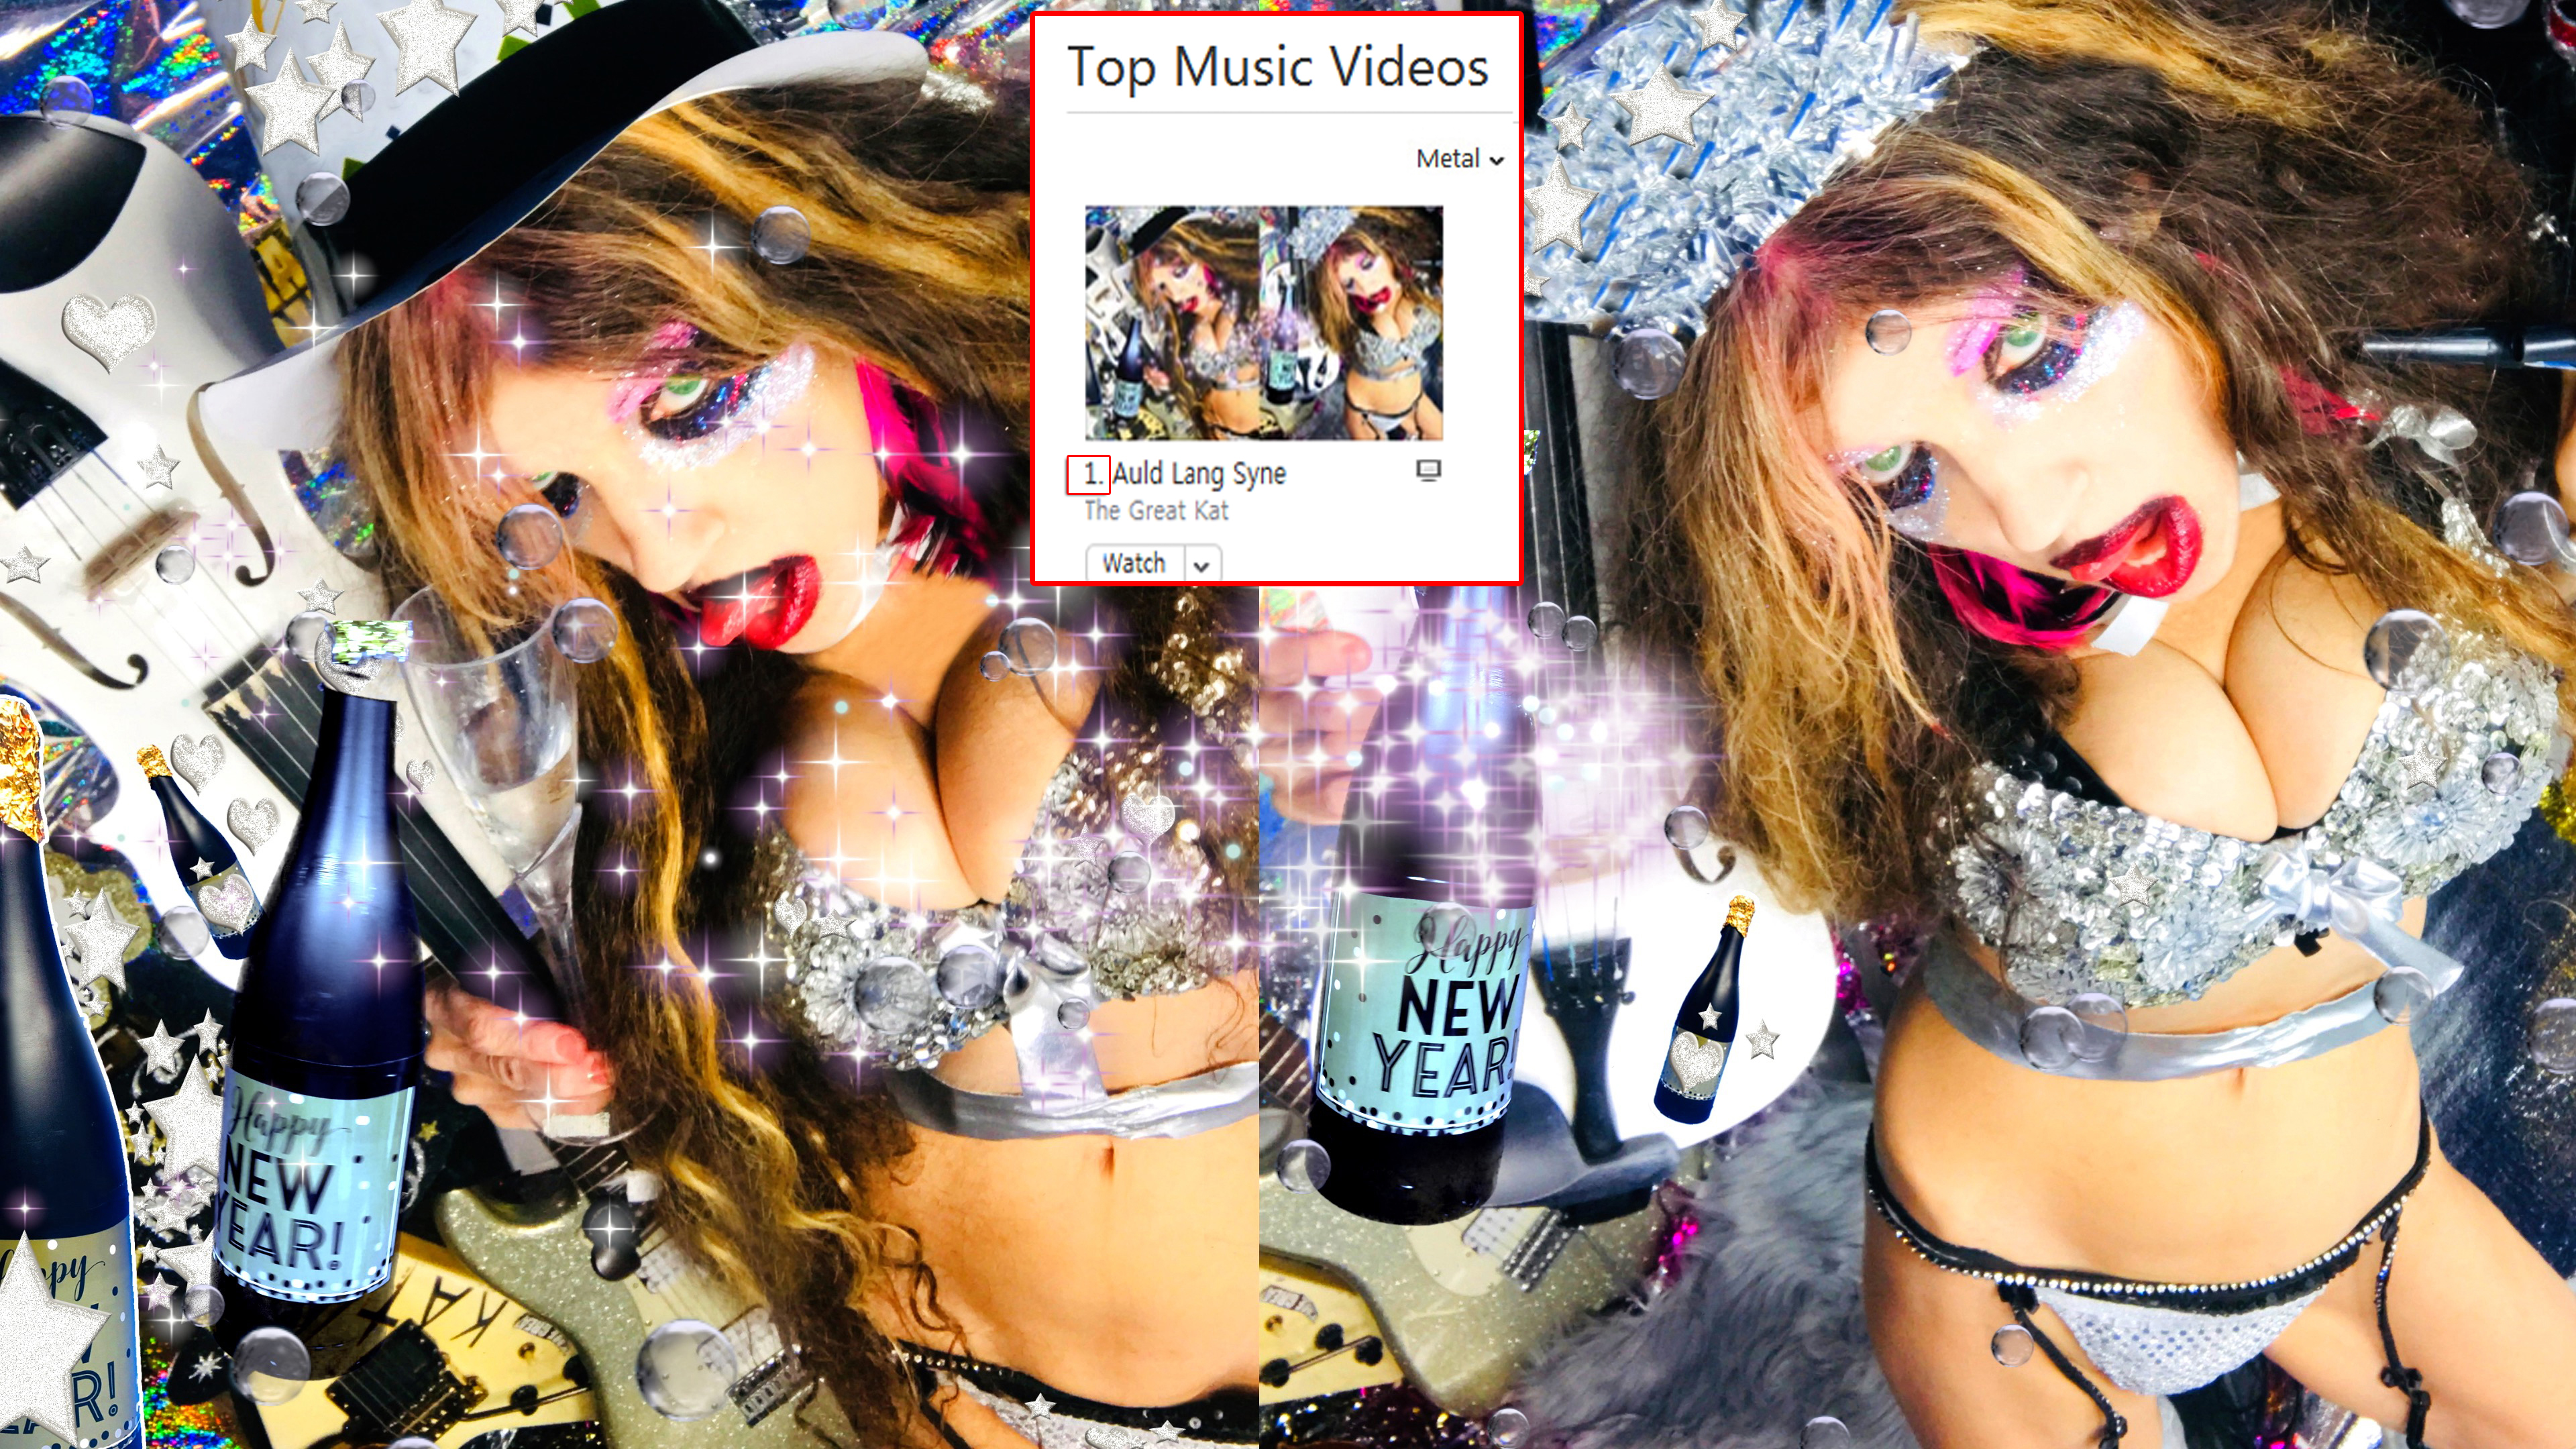 "Auld Lang Syne" is the #1 Music Video on iTunes Chart by The Great Kat Violin Goddess! The Great Kat Shreds the Official New Year's Song on Violin on New Music Video!